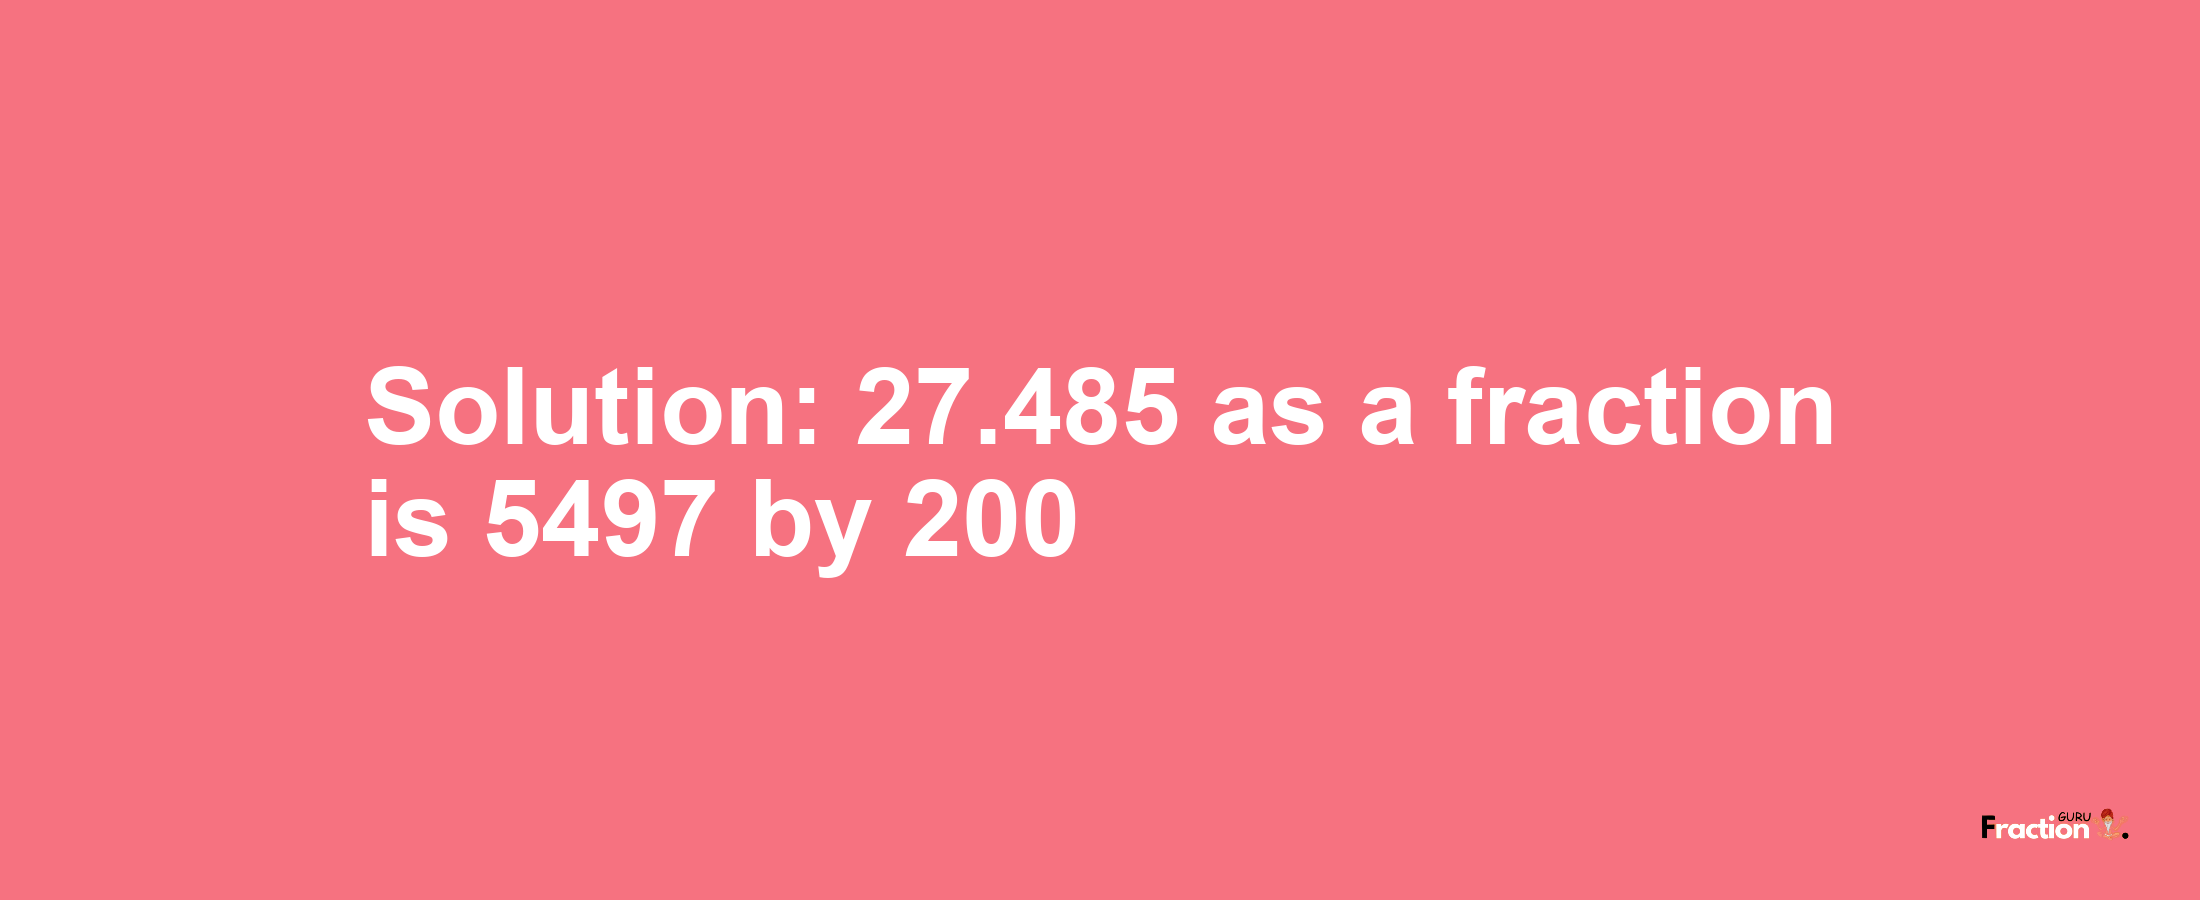 Solution:27.485 as a fraction is 5497/200